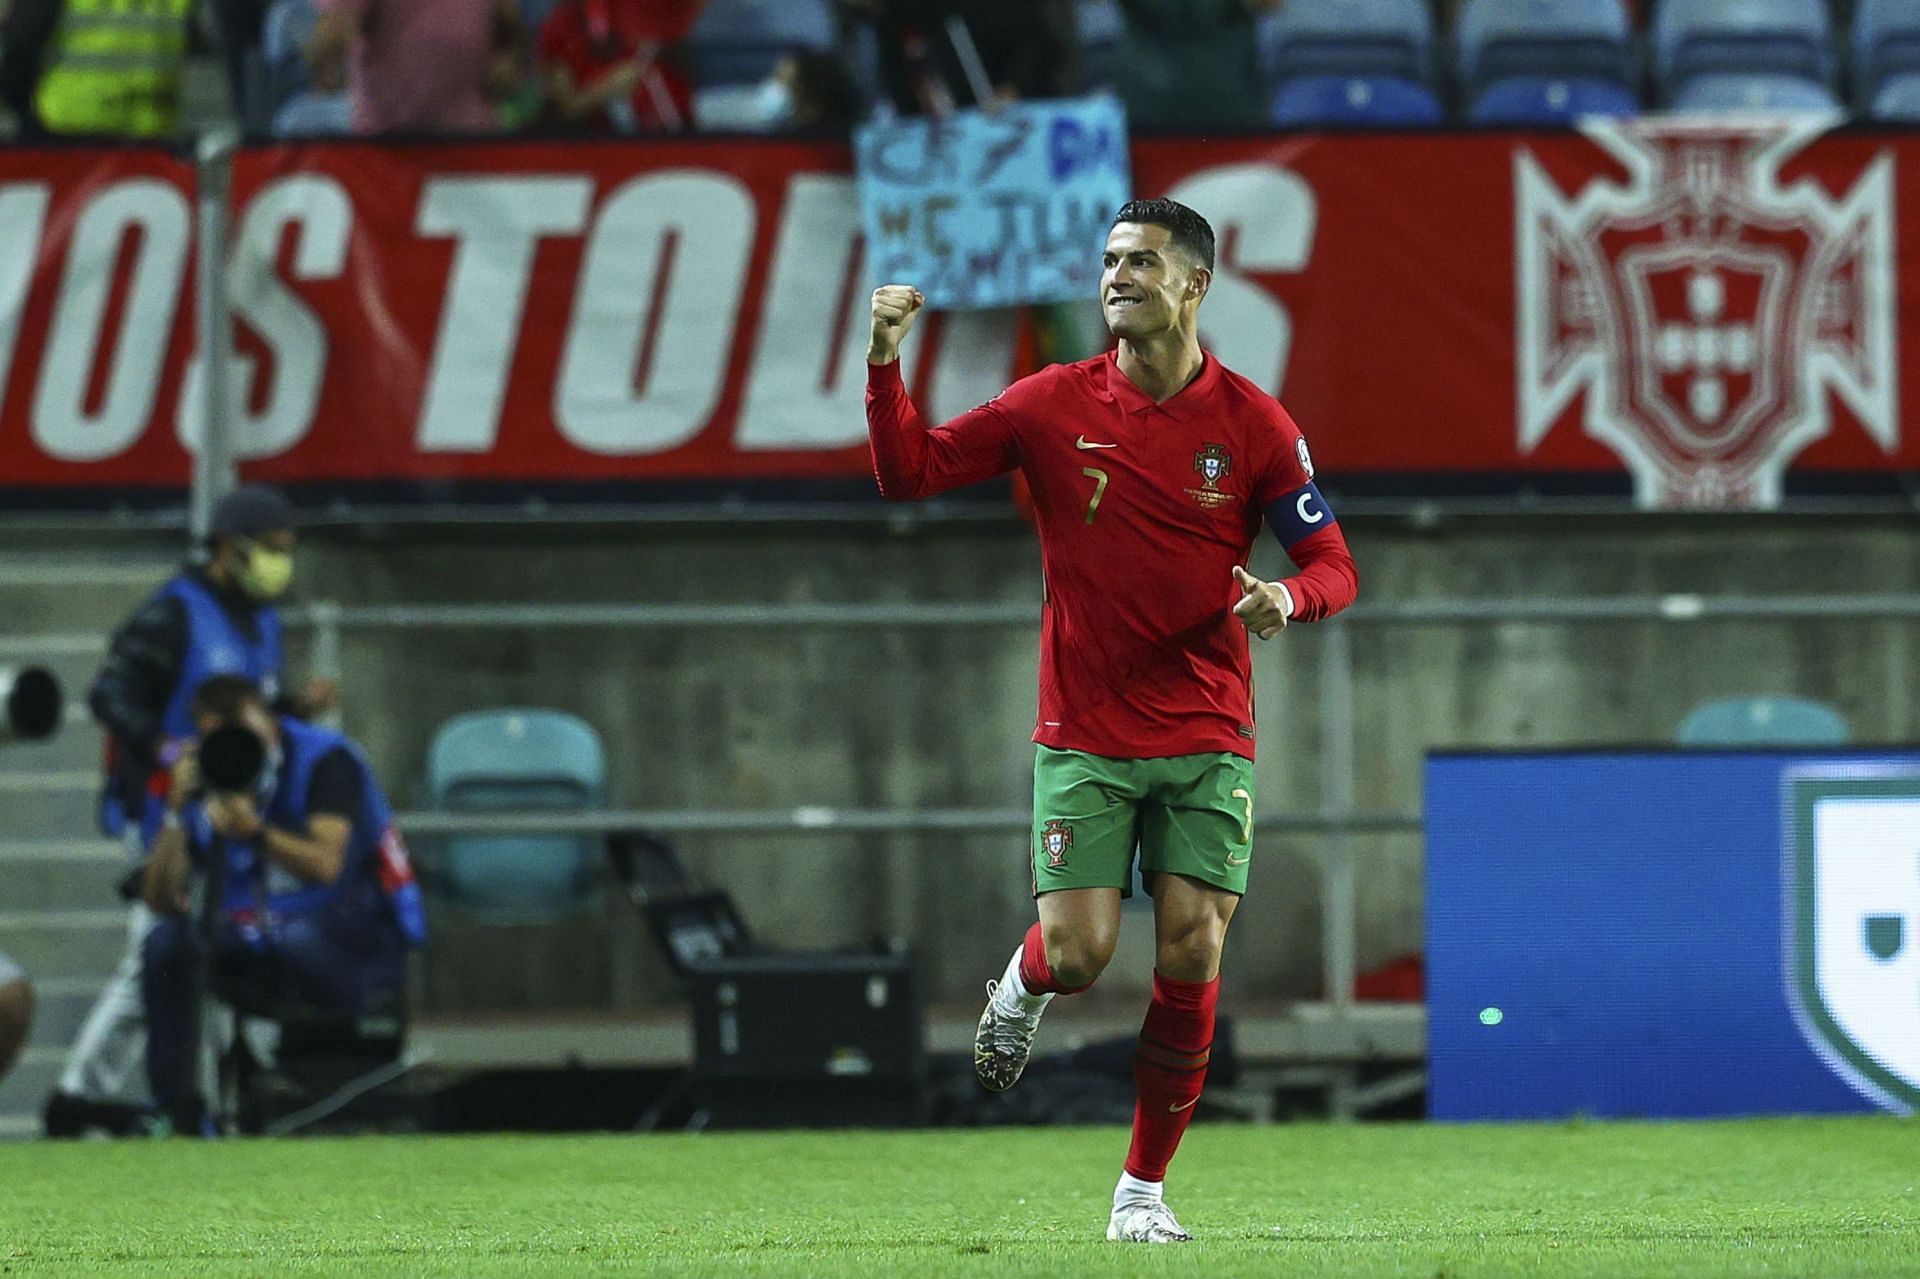 Portugal captain Cristiano Ronaldo. (Photo by Carlos Rodrigues/Getty Images)